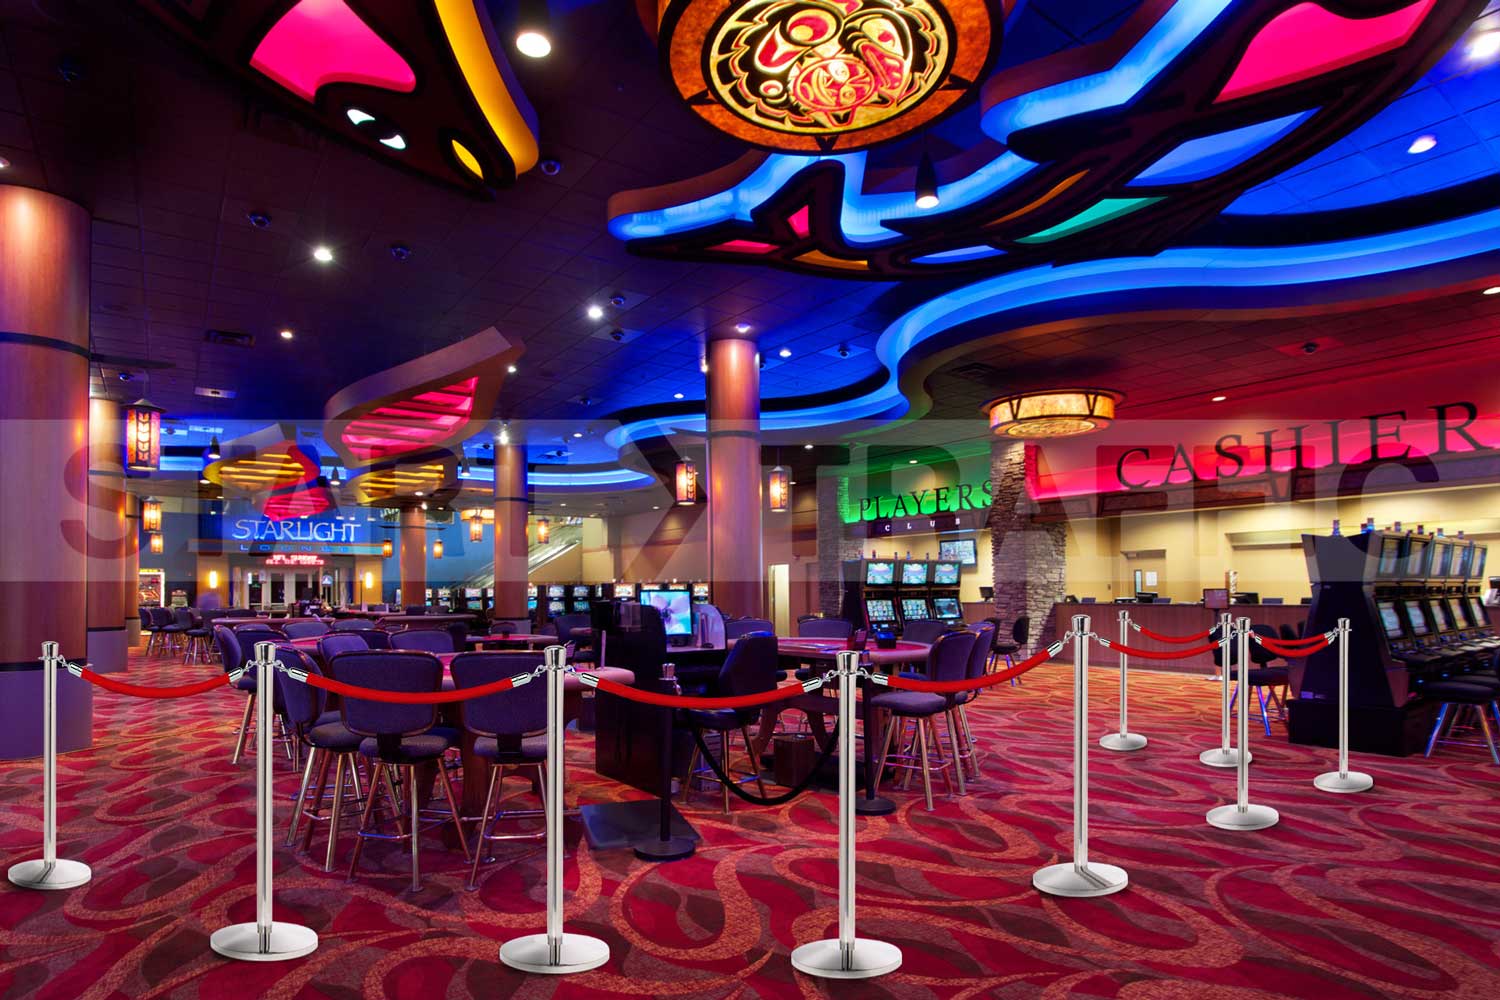 Velour Barriers set up in a casino